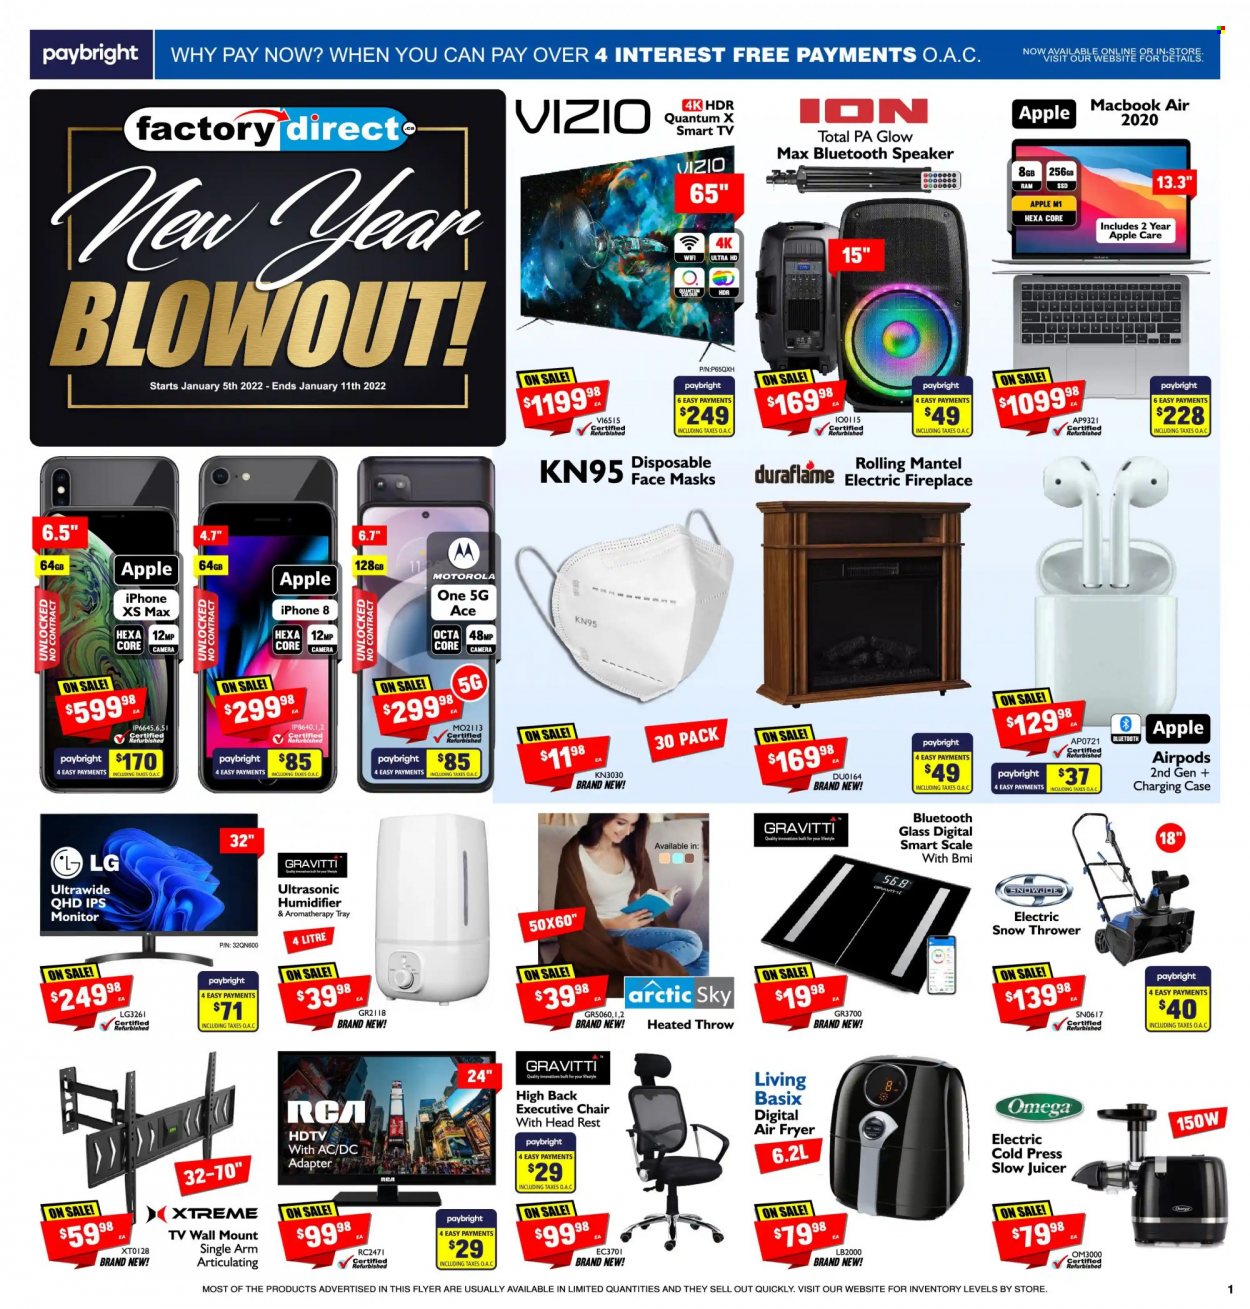 thumbnail - Factory Direct Flyer - January 05, 2022 - January 11, 2022 - Sales products - Apple, Vizio, scale, pin, iPhone, Ace, MacBook, MacBook Air, RCA, UHD TV, ultra hd, HDTV, TV, speaker, bluetooth speaker, Airpods, adapter, tv wall mount, air fryer, juicer, heated throw, humidifier, camera, LG, monitor, Motorola, smart tv, iPhone 8. Page 1.